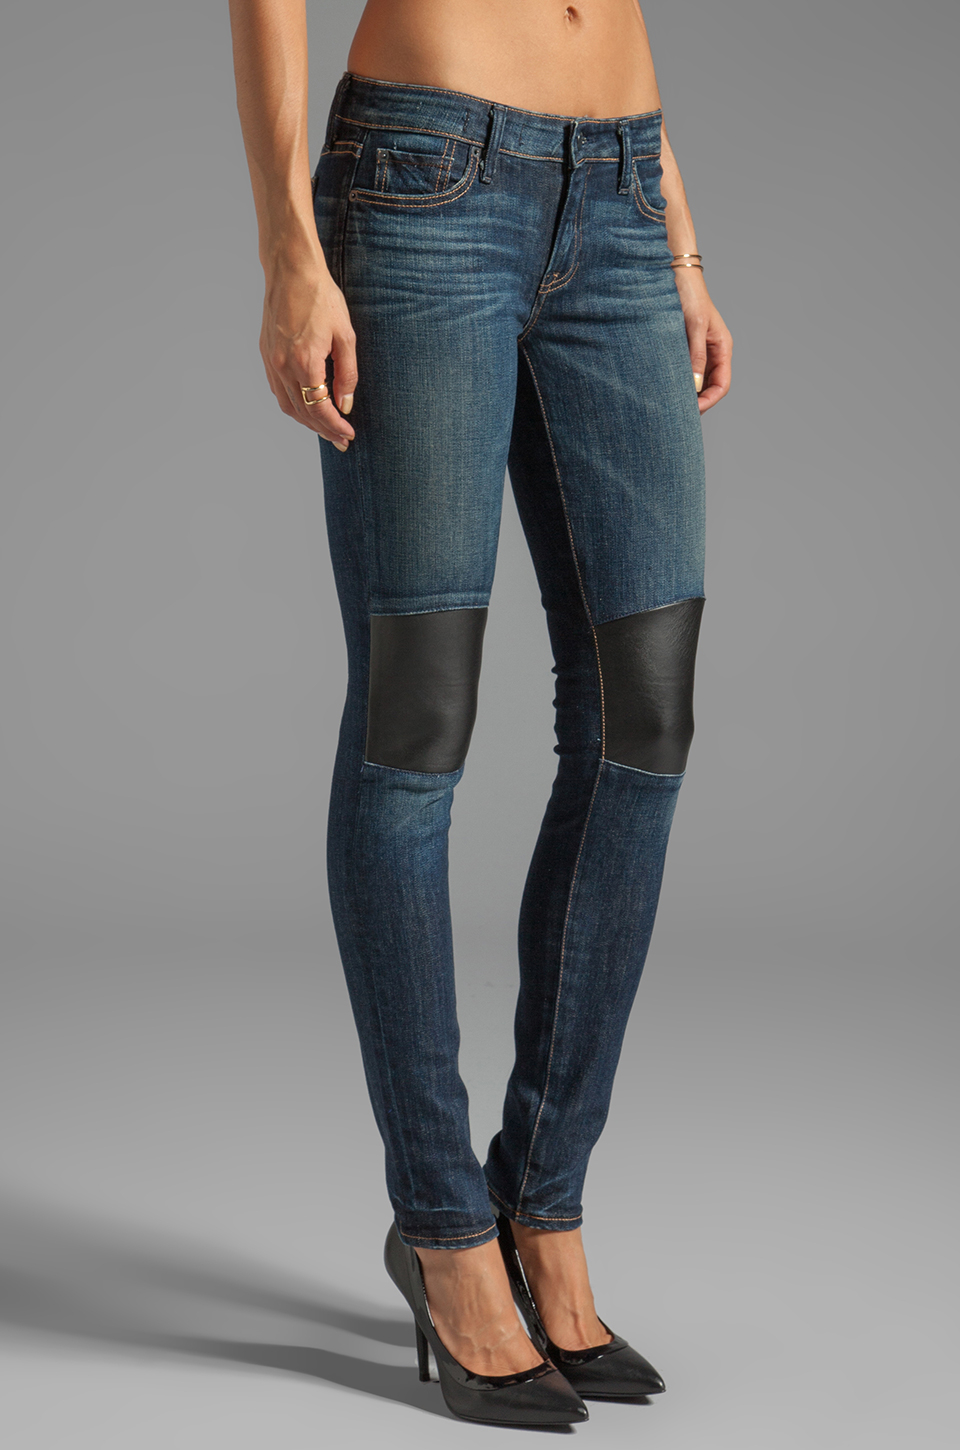 jeans with leather knee patches